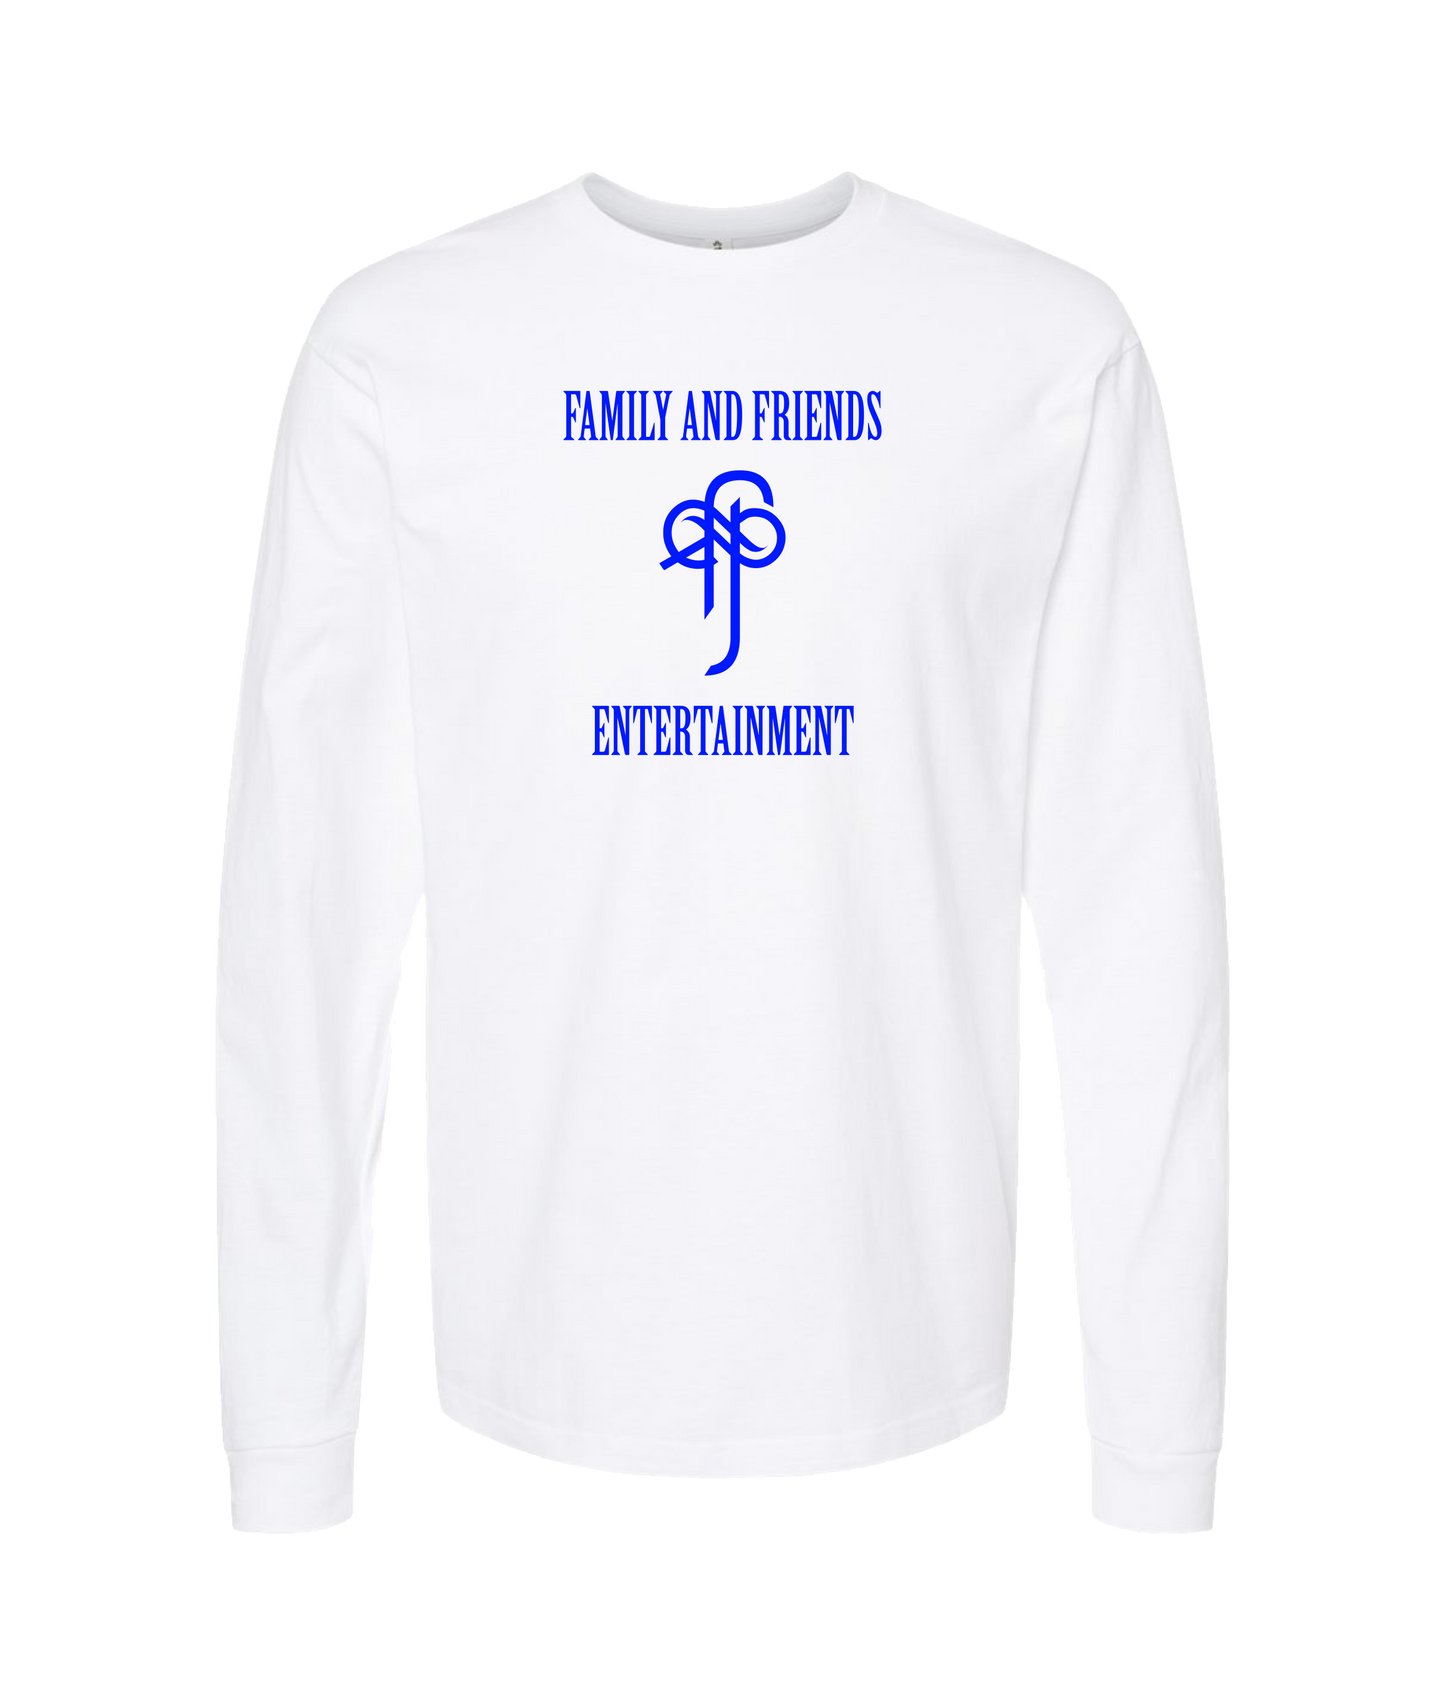 Sincrawford - Family and Friends Ent. (Blue) - White Long Sleeve T